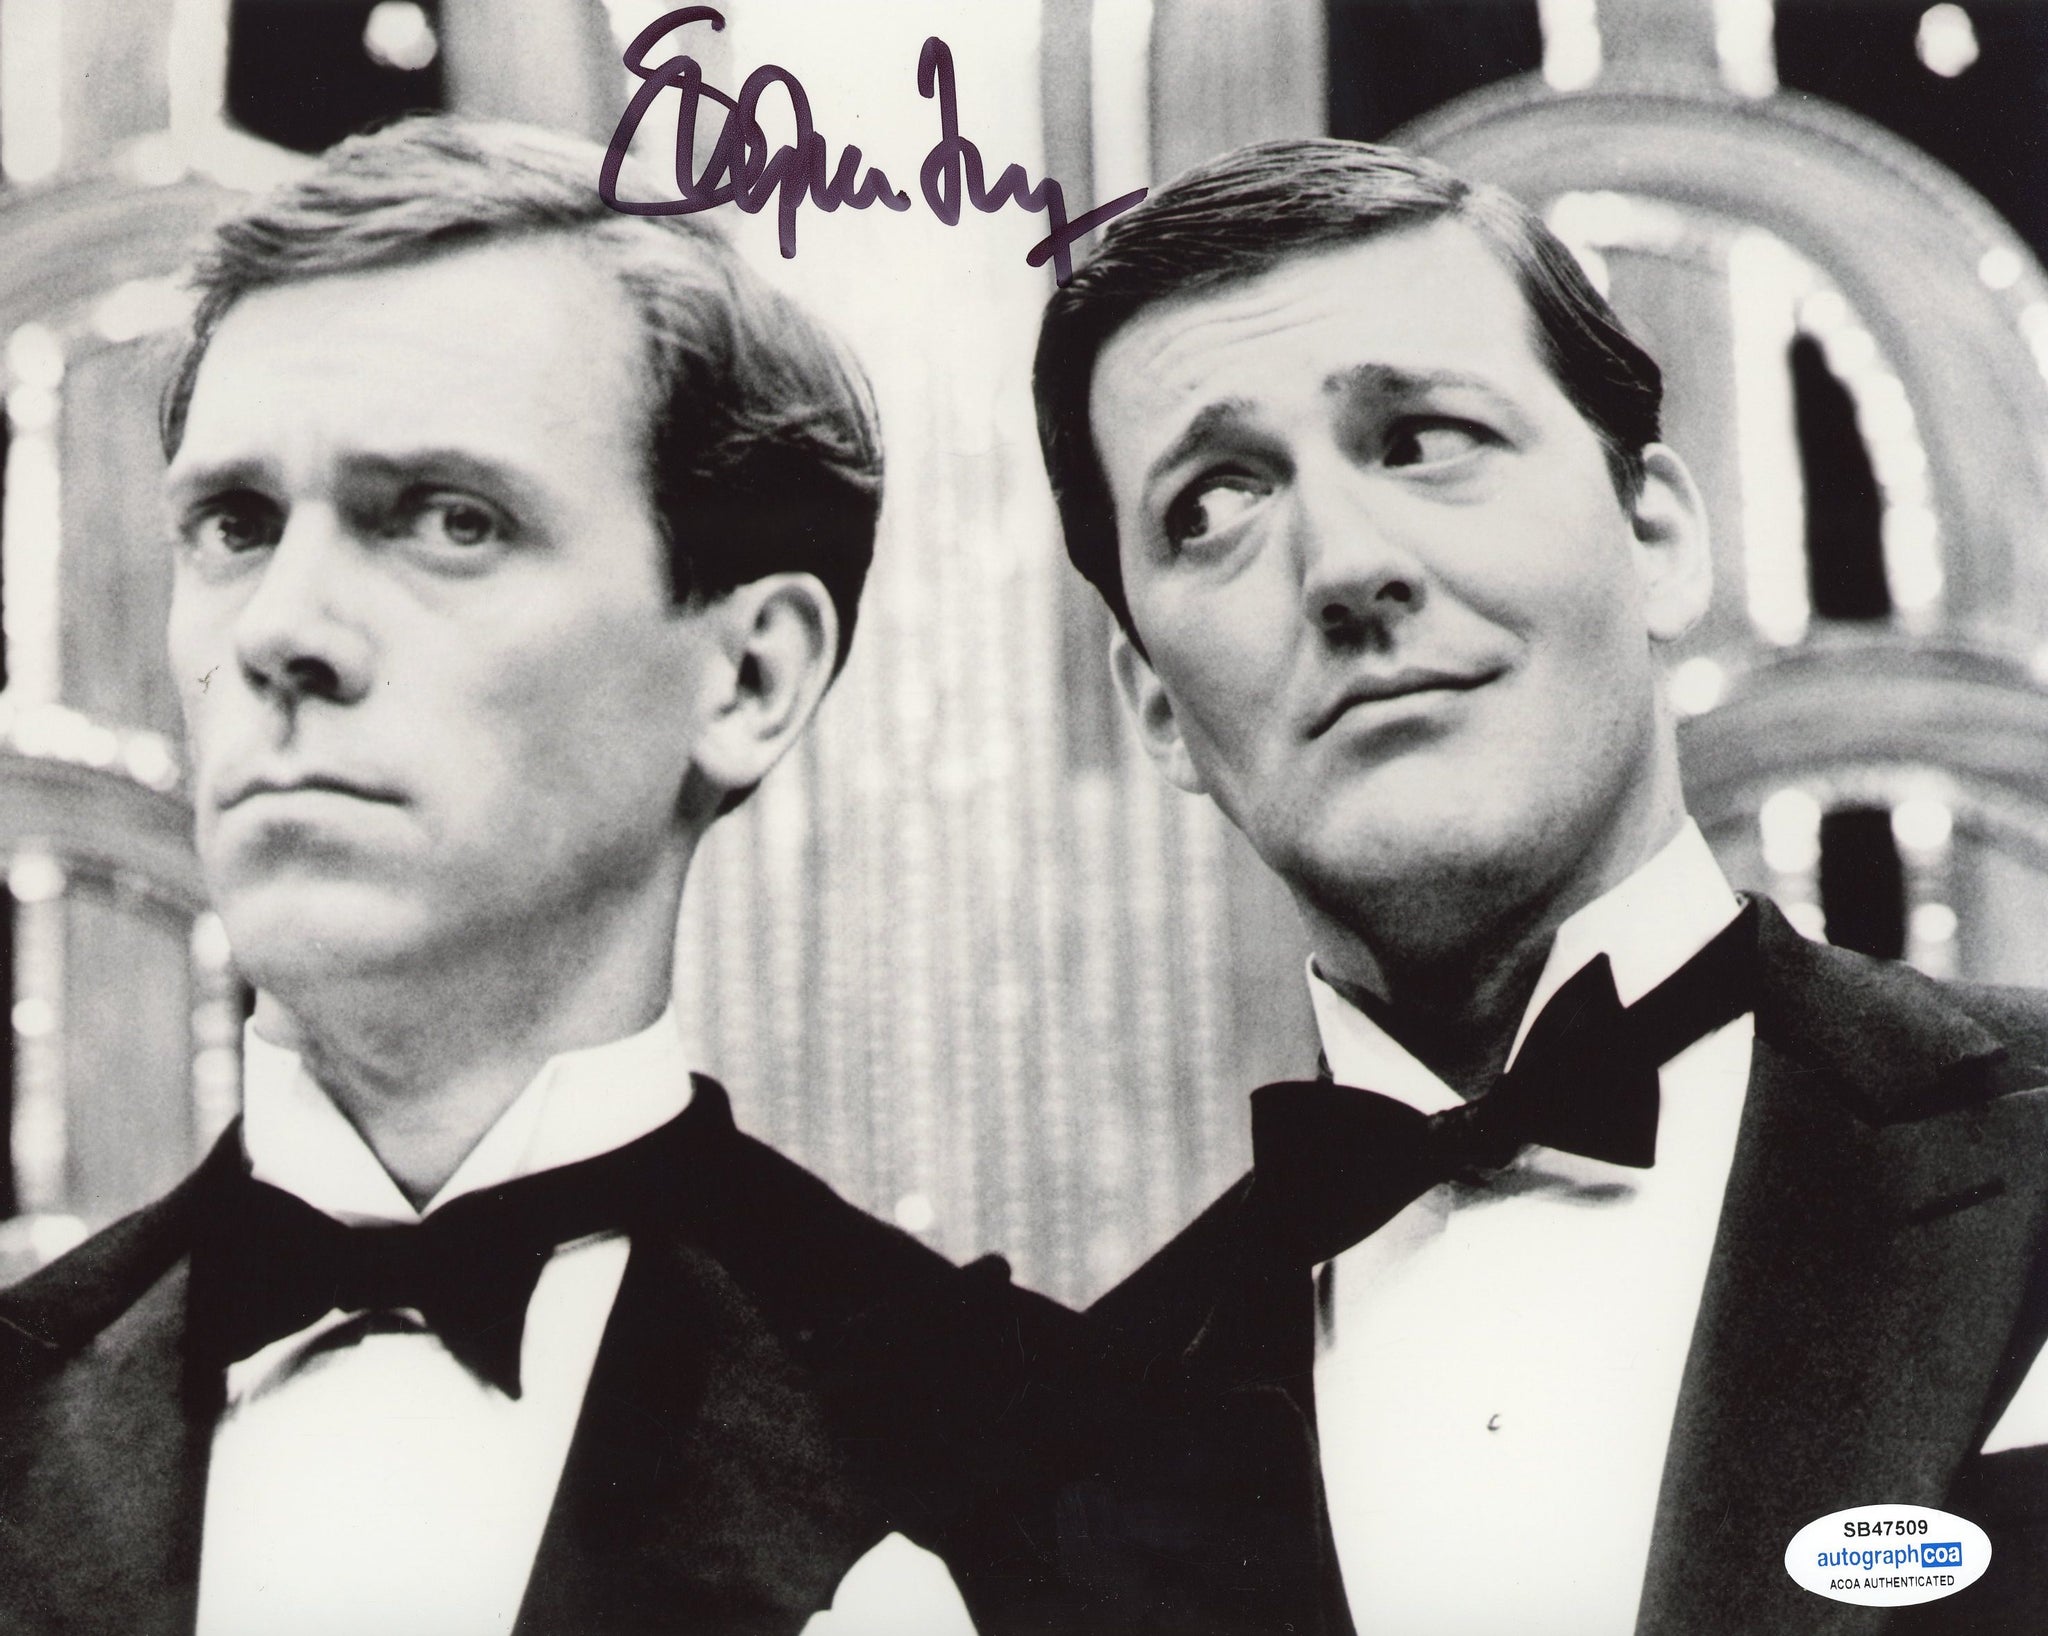 Stephen Fry Jeeves Signed Autograph 8x10 Photo ACOA